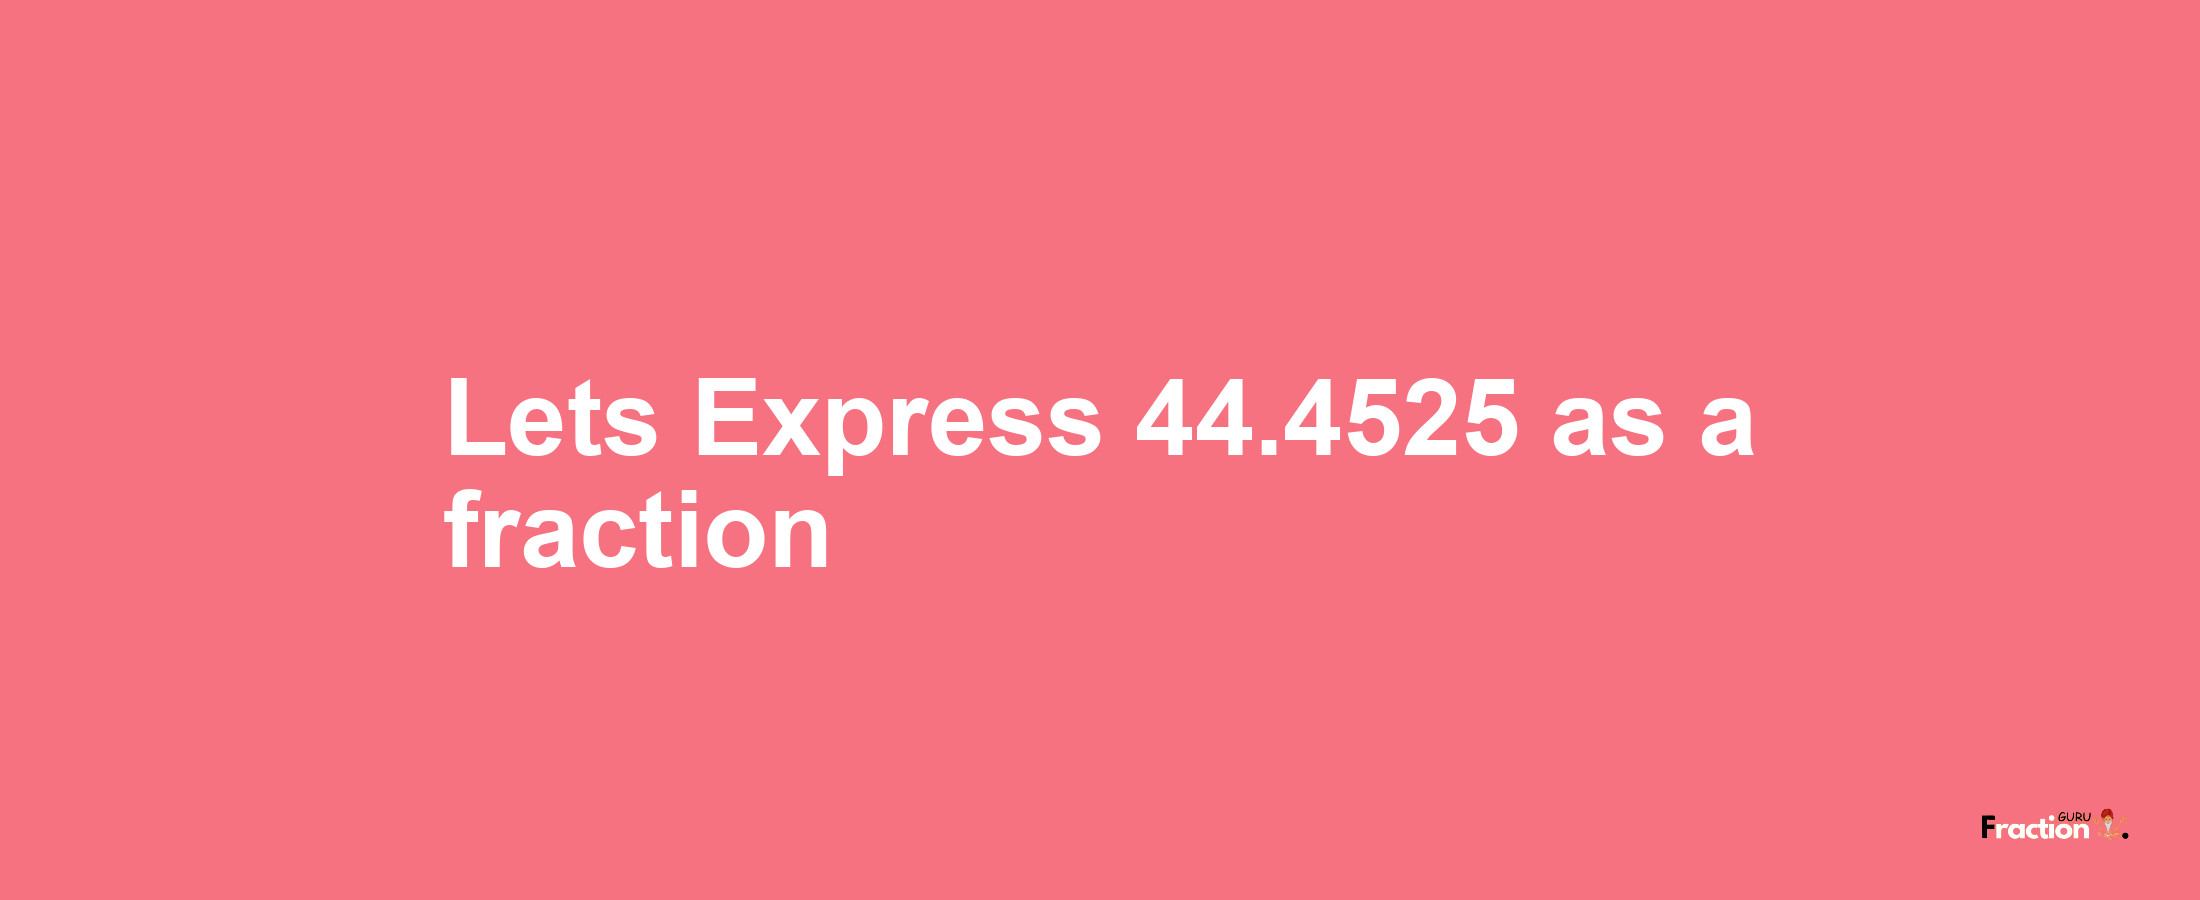 Lets Express 44.4525 as afraction